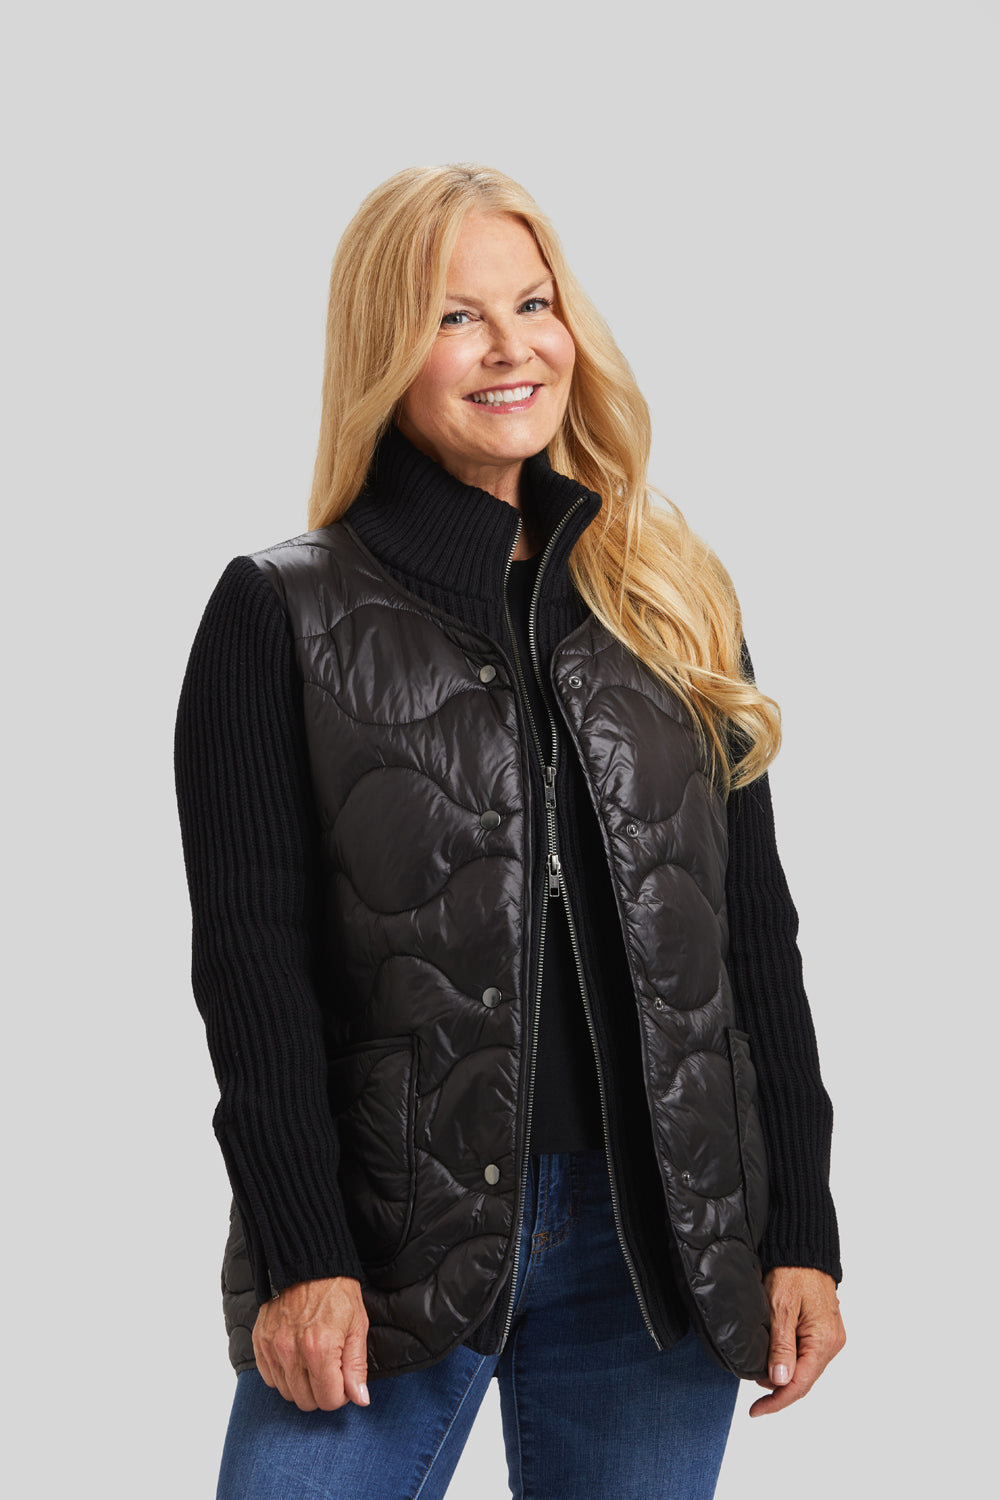 ribbed cotton blend with a quilted puffer vest top layer. Women's clothing Long Island, Woodbury, Greenvale, New York. High-end women's fashion Long Island Designer clothing Woodbury NY Luxury women's clothing Greenvale Fashion boutiques on Long Island Women's designer fashion stores Woodbury NY fashion boutiques